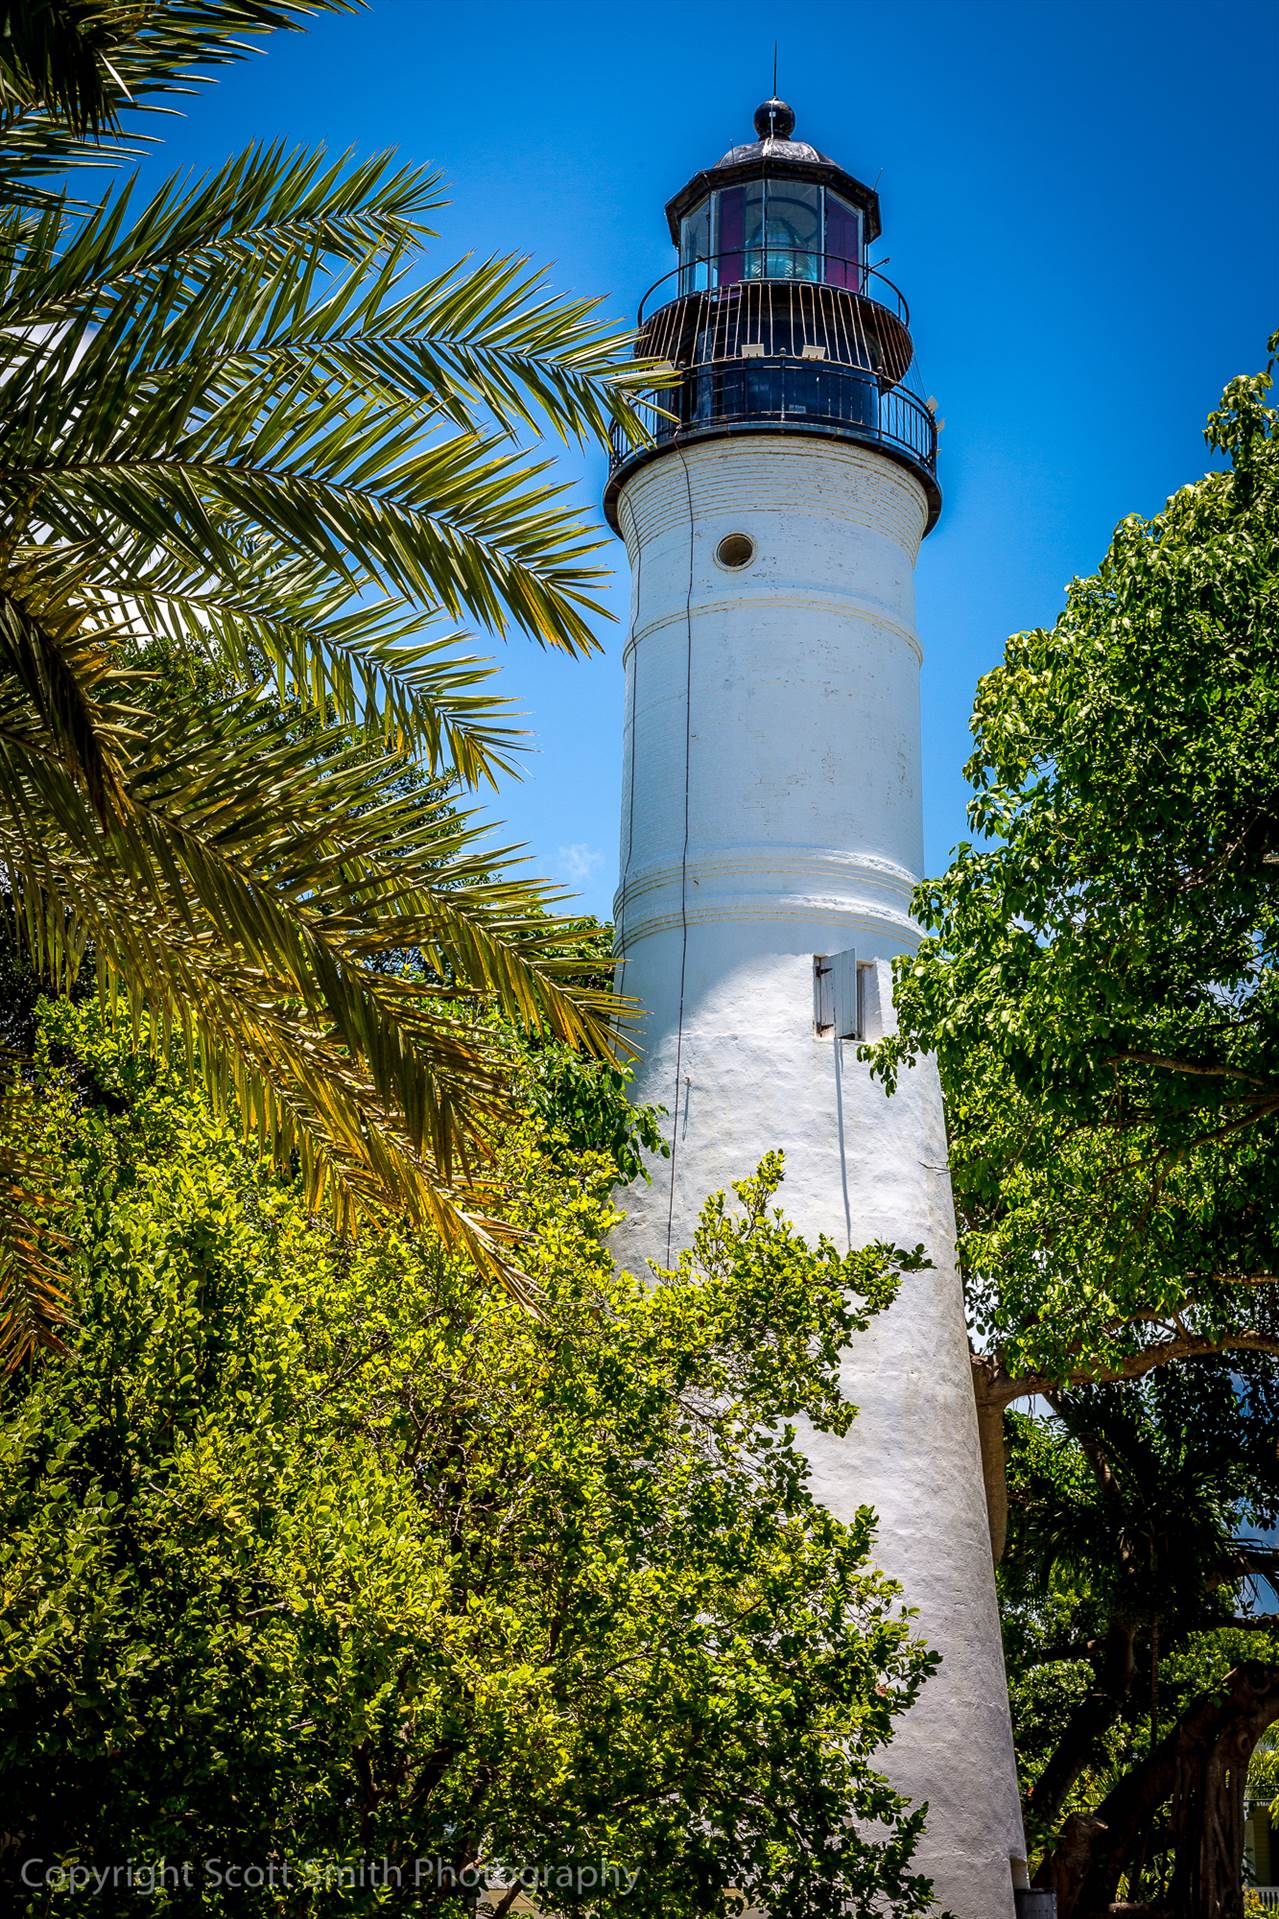 Key West Lighthouse Across from Hemingway's house in Key West, Florida by Scott Smith Photos